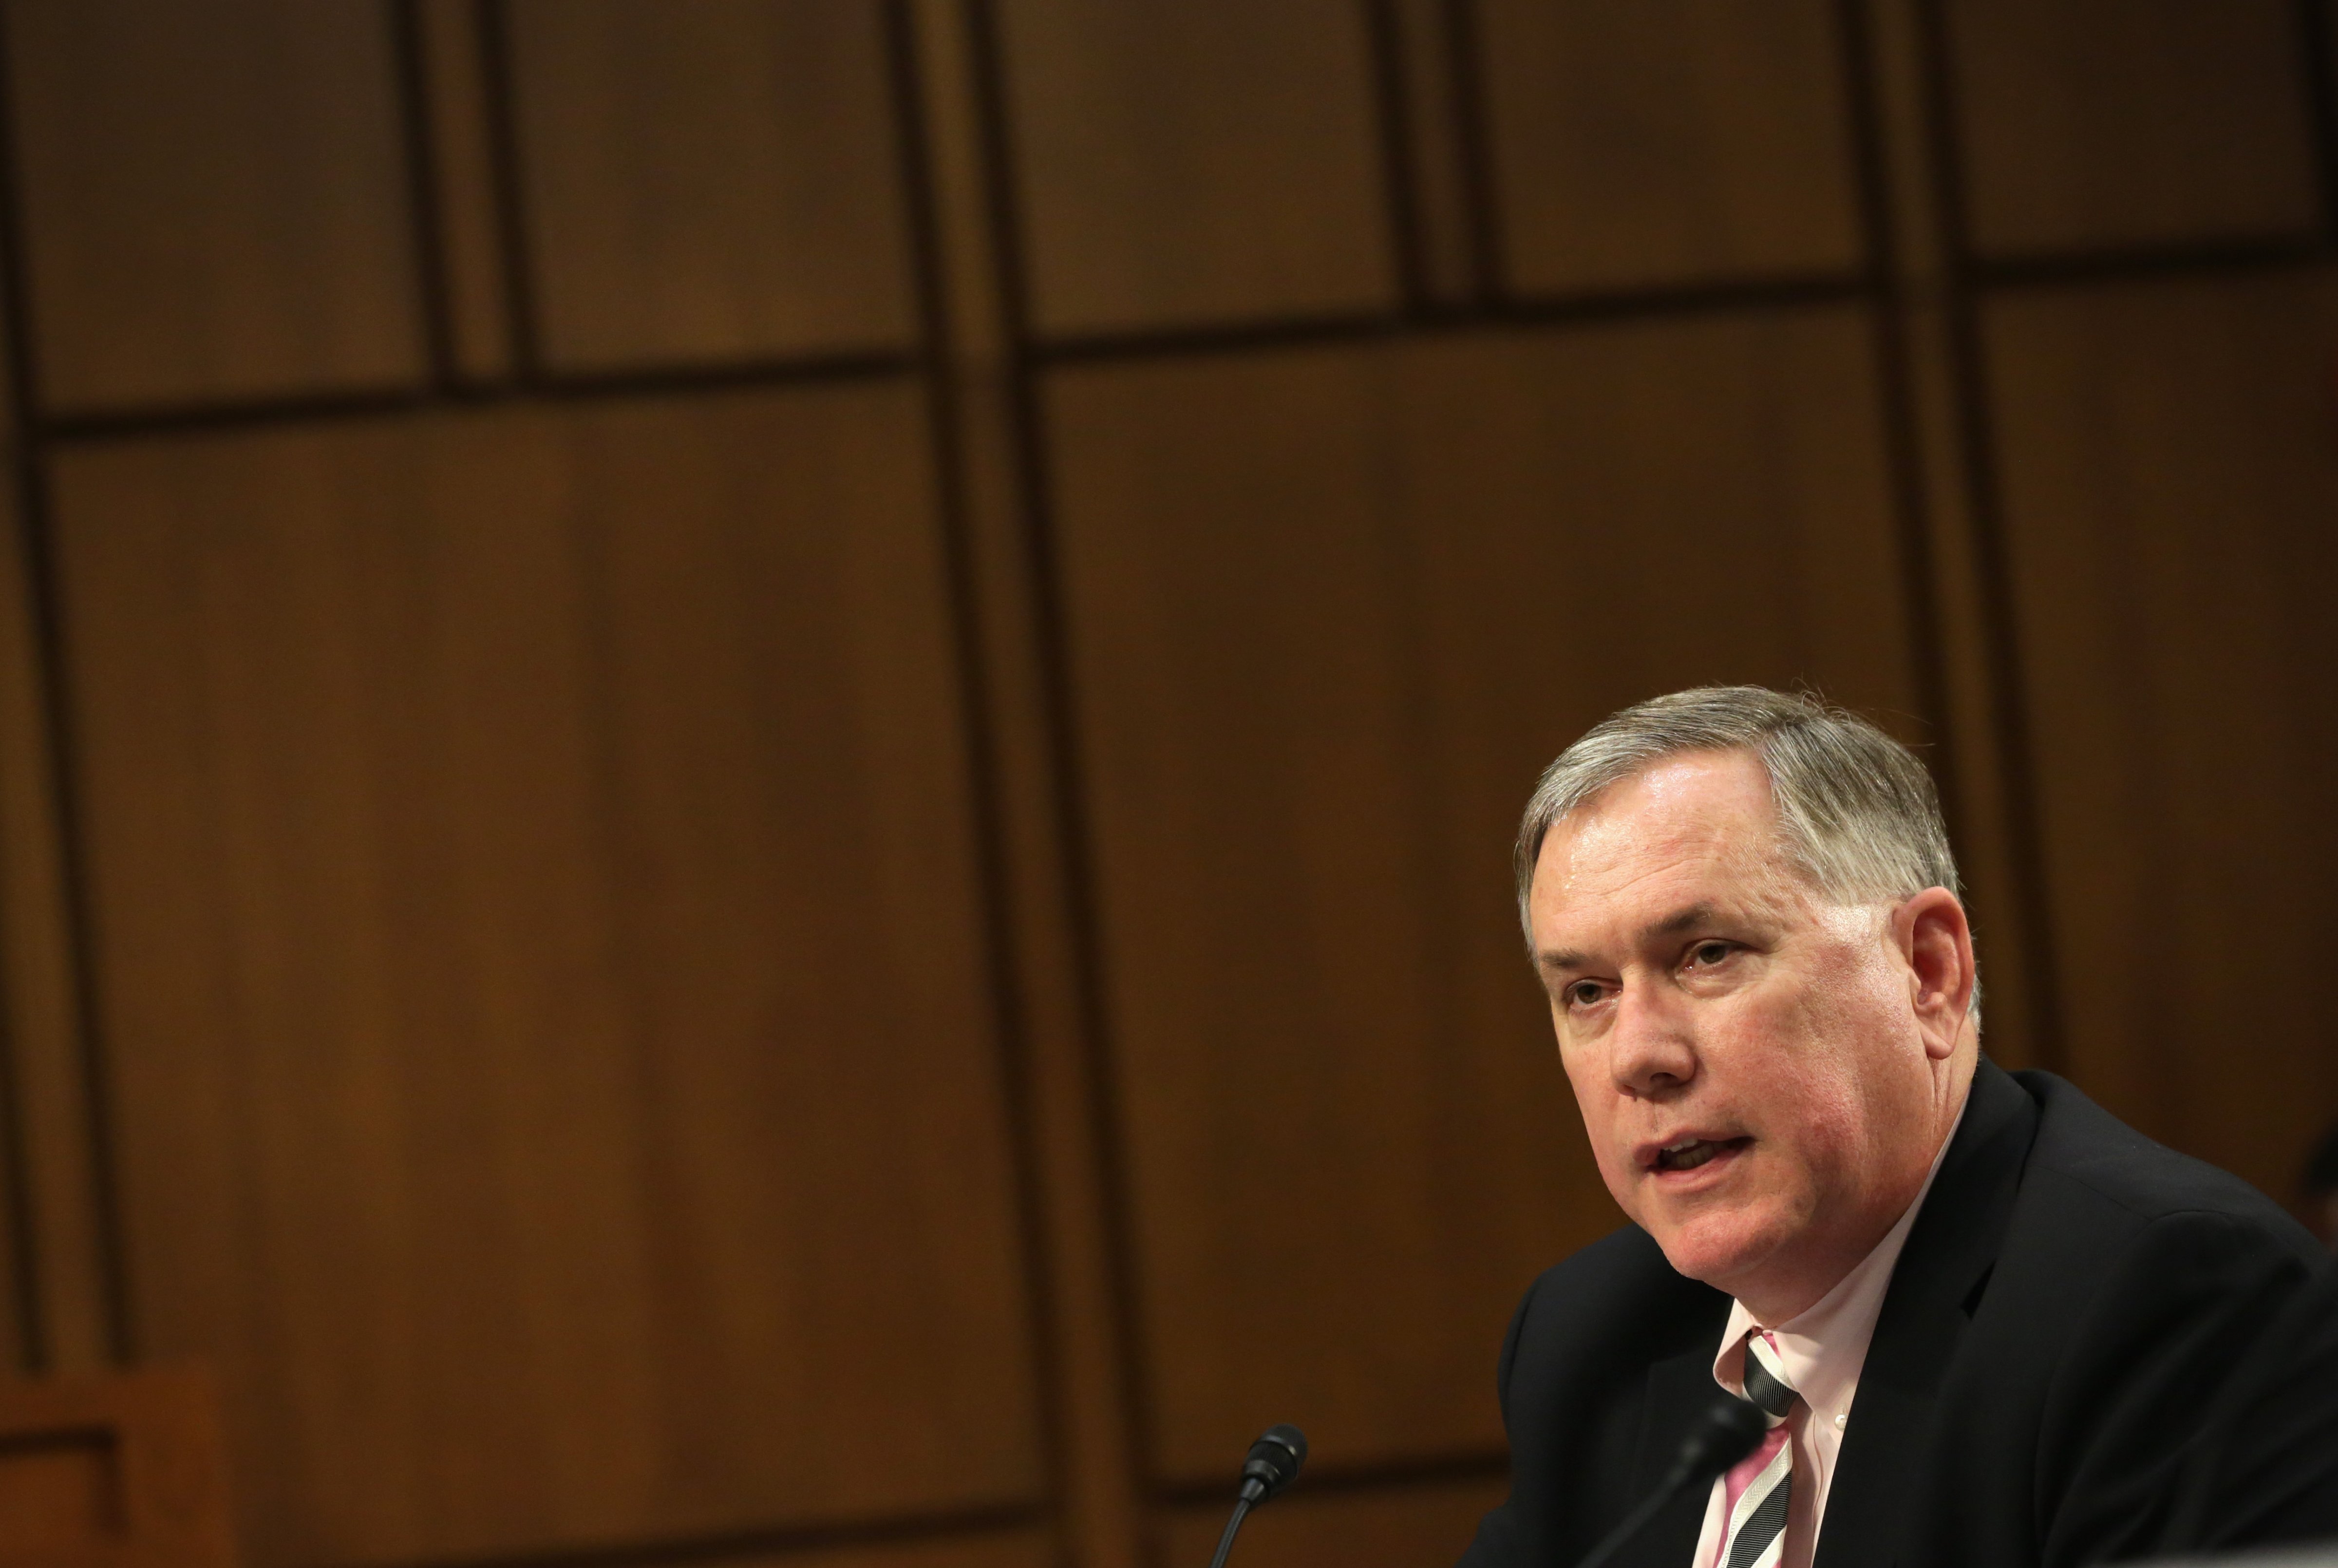 National Security Agency deputy director Richard Ledgett testifies during a hearing before the Senate (Select) Intelligence Committee on June 5, 2014, on Capitol Hill in Washington, D.C. (Alex Wong—Getty Images)